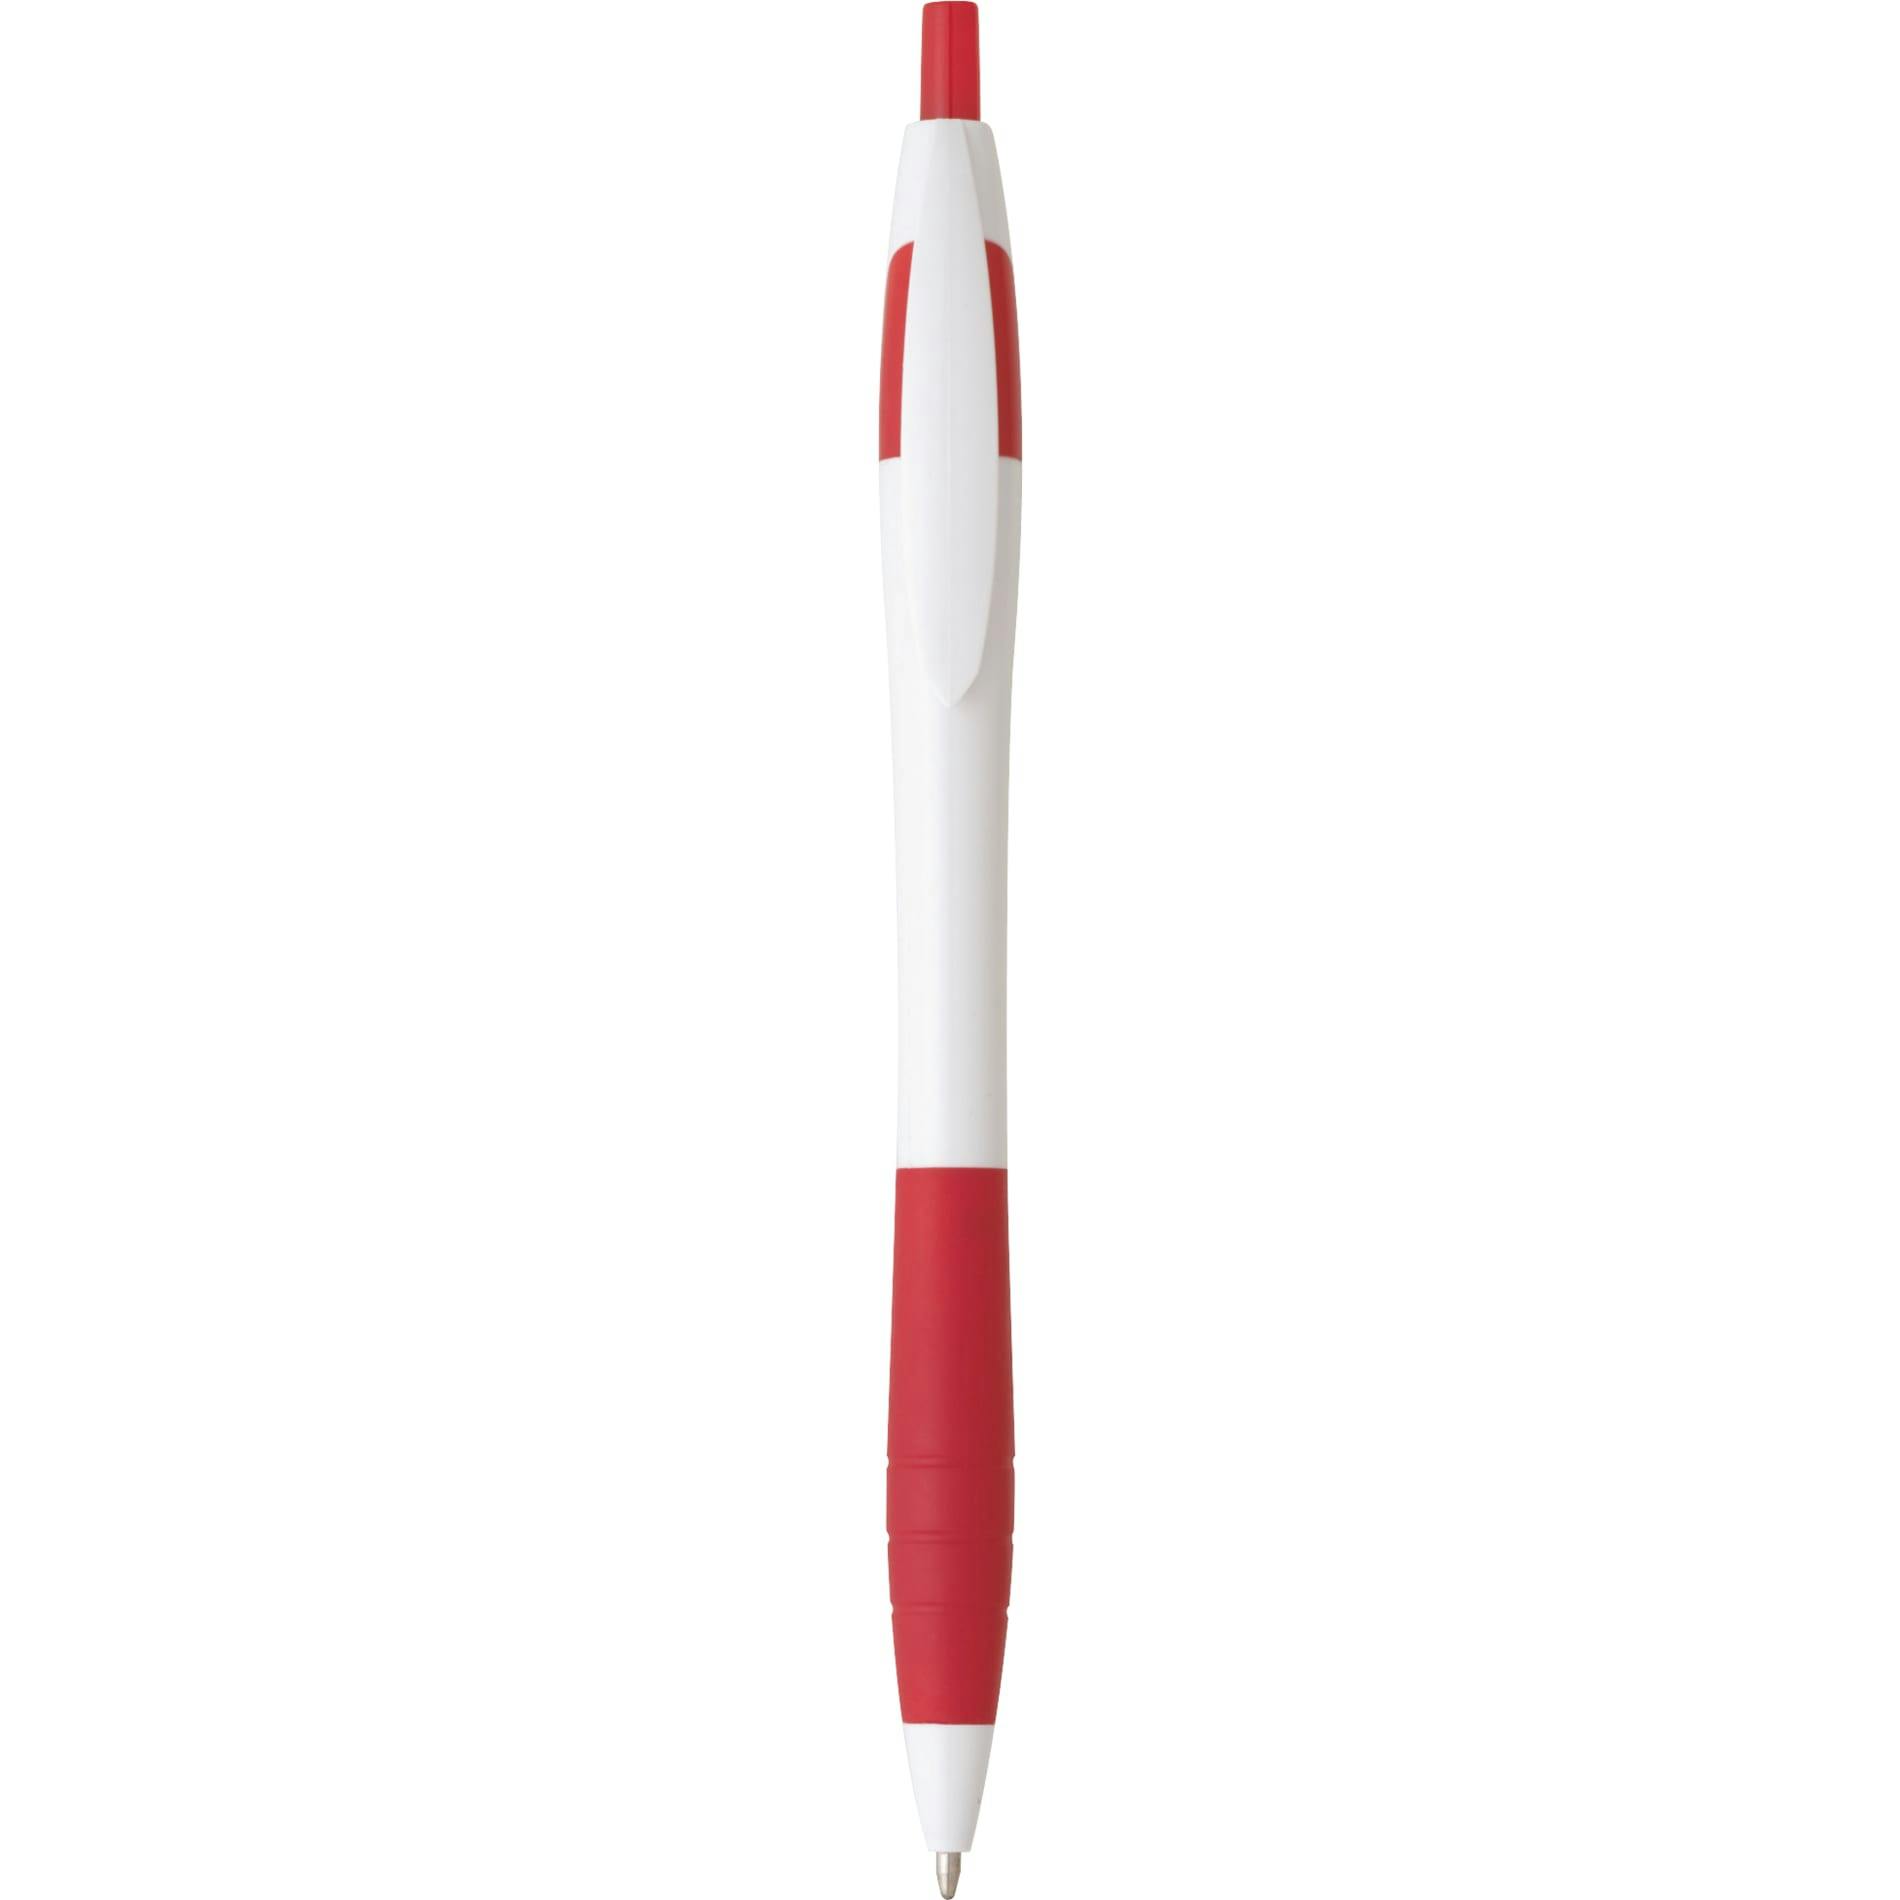 Cougar Rubber Grip Ballpoint Pen - additional Image 1